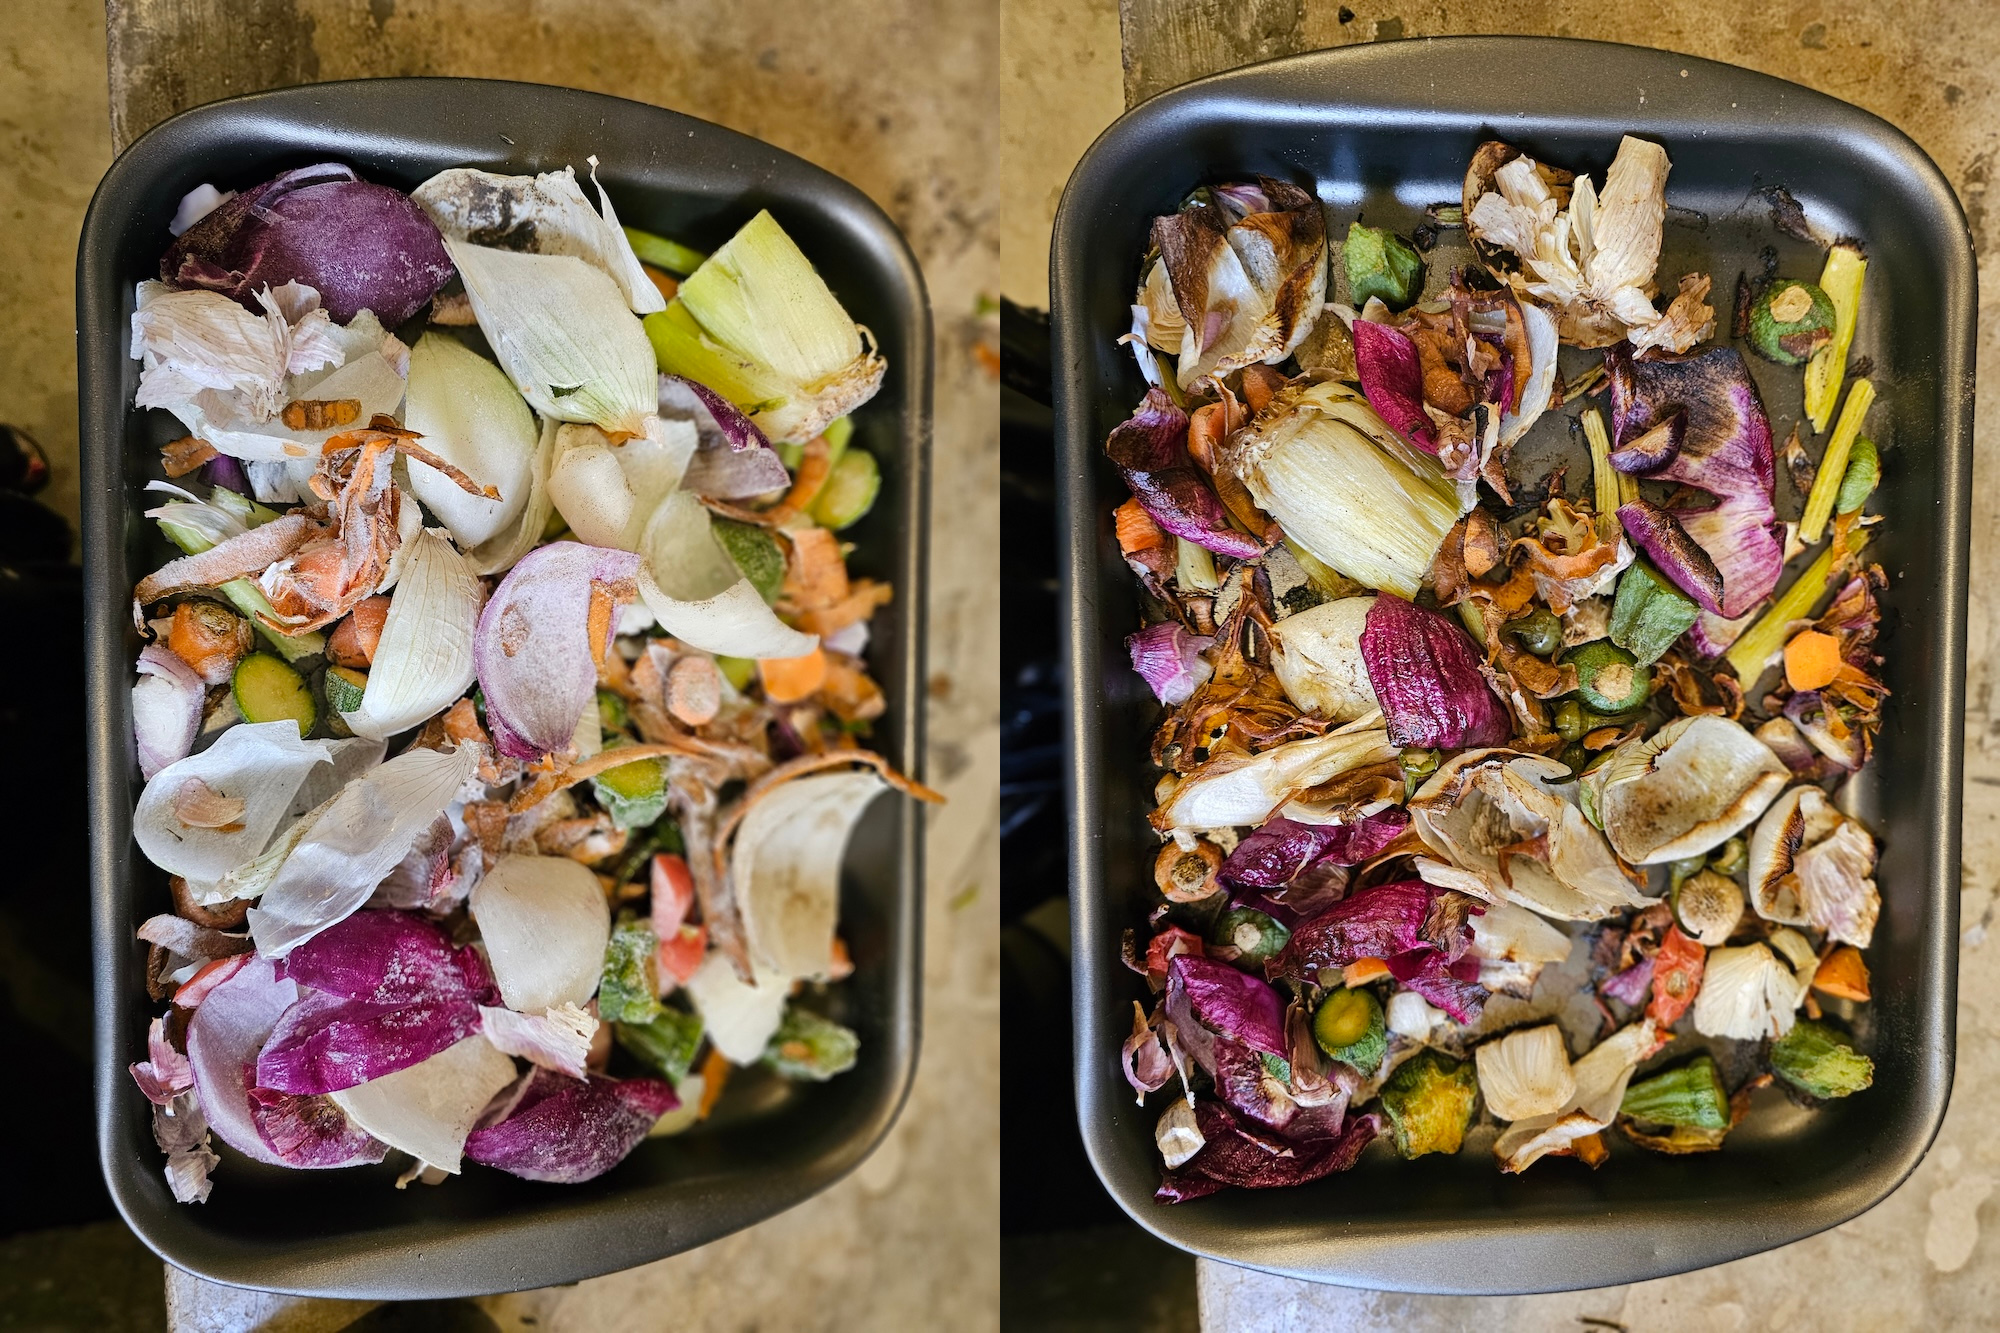 roasting scraps - how to make vegetable broth from scraps